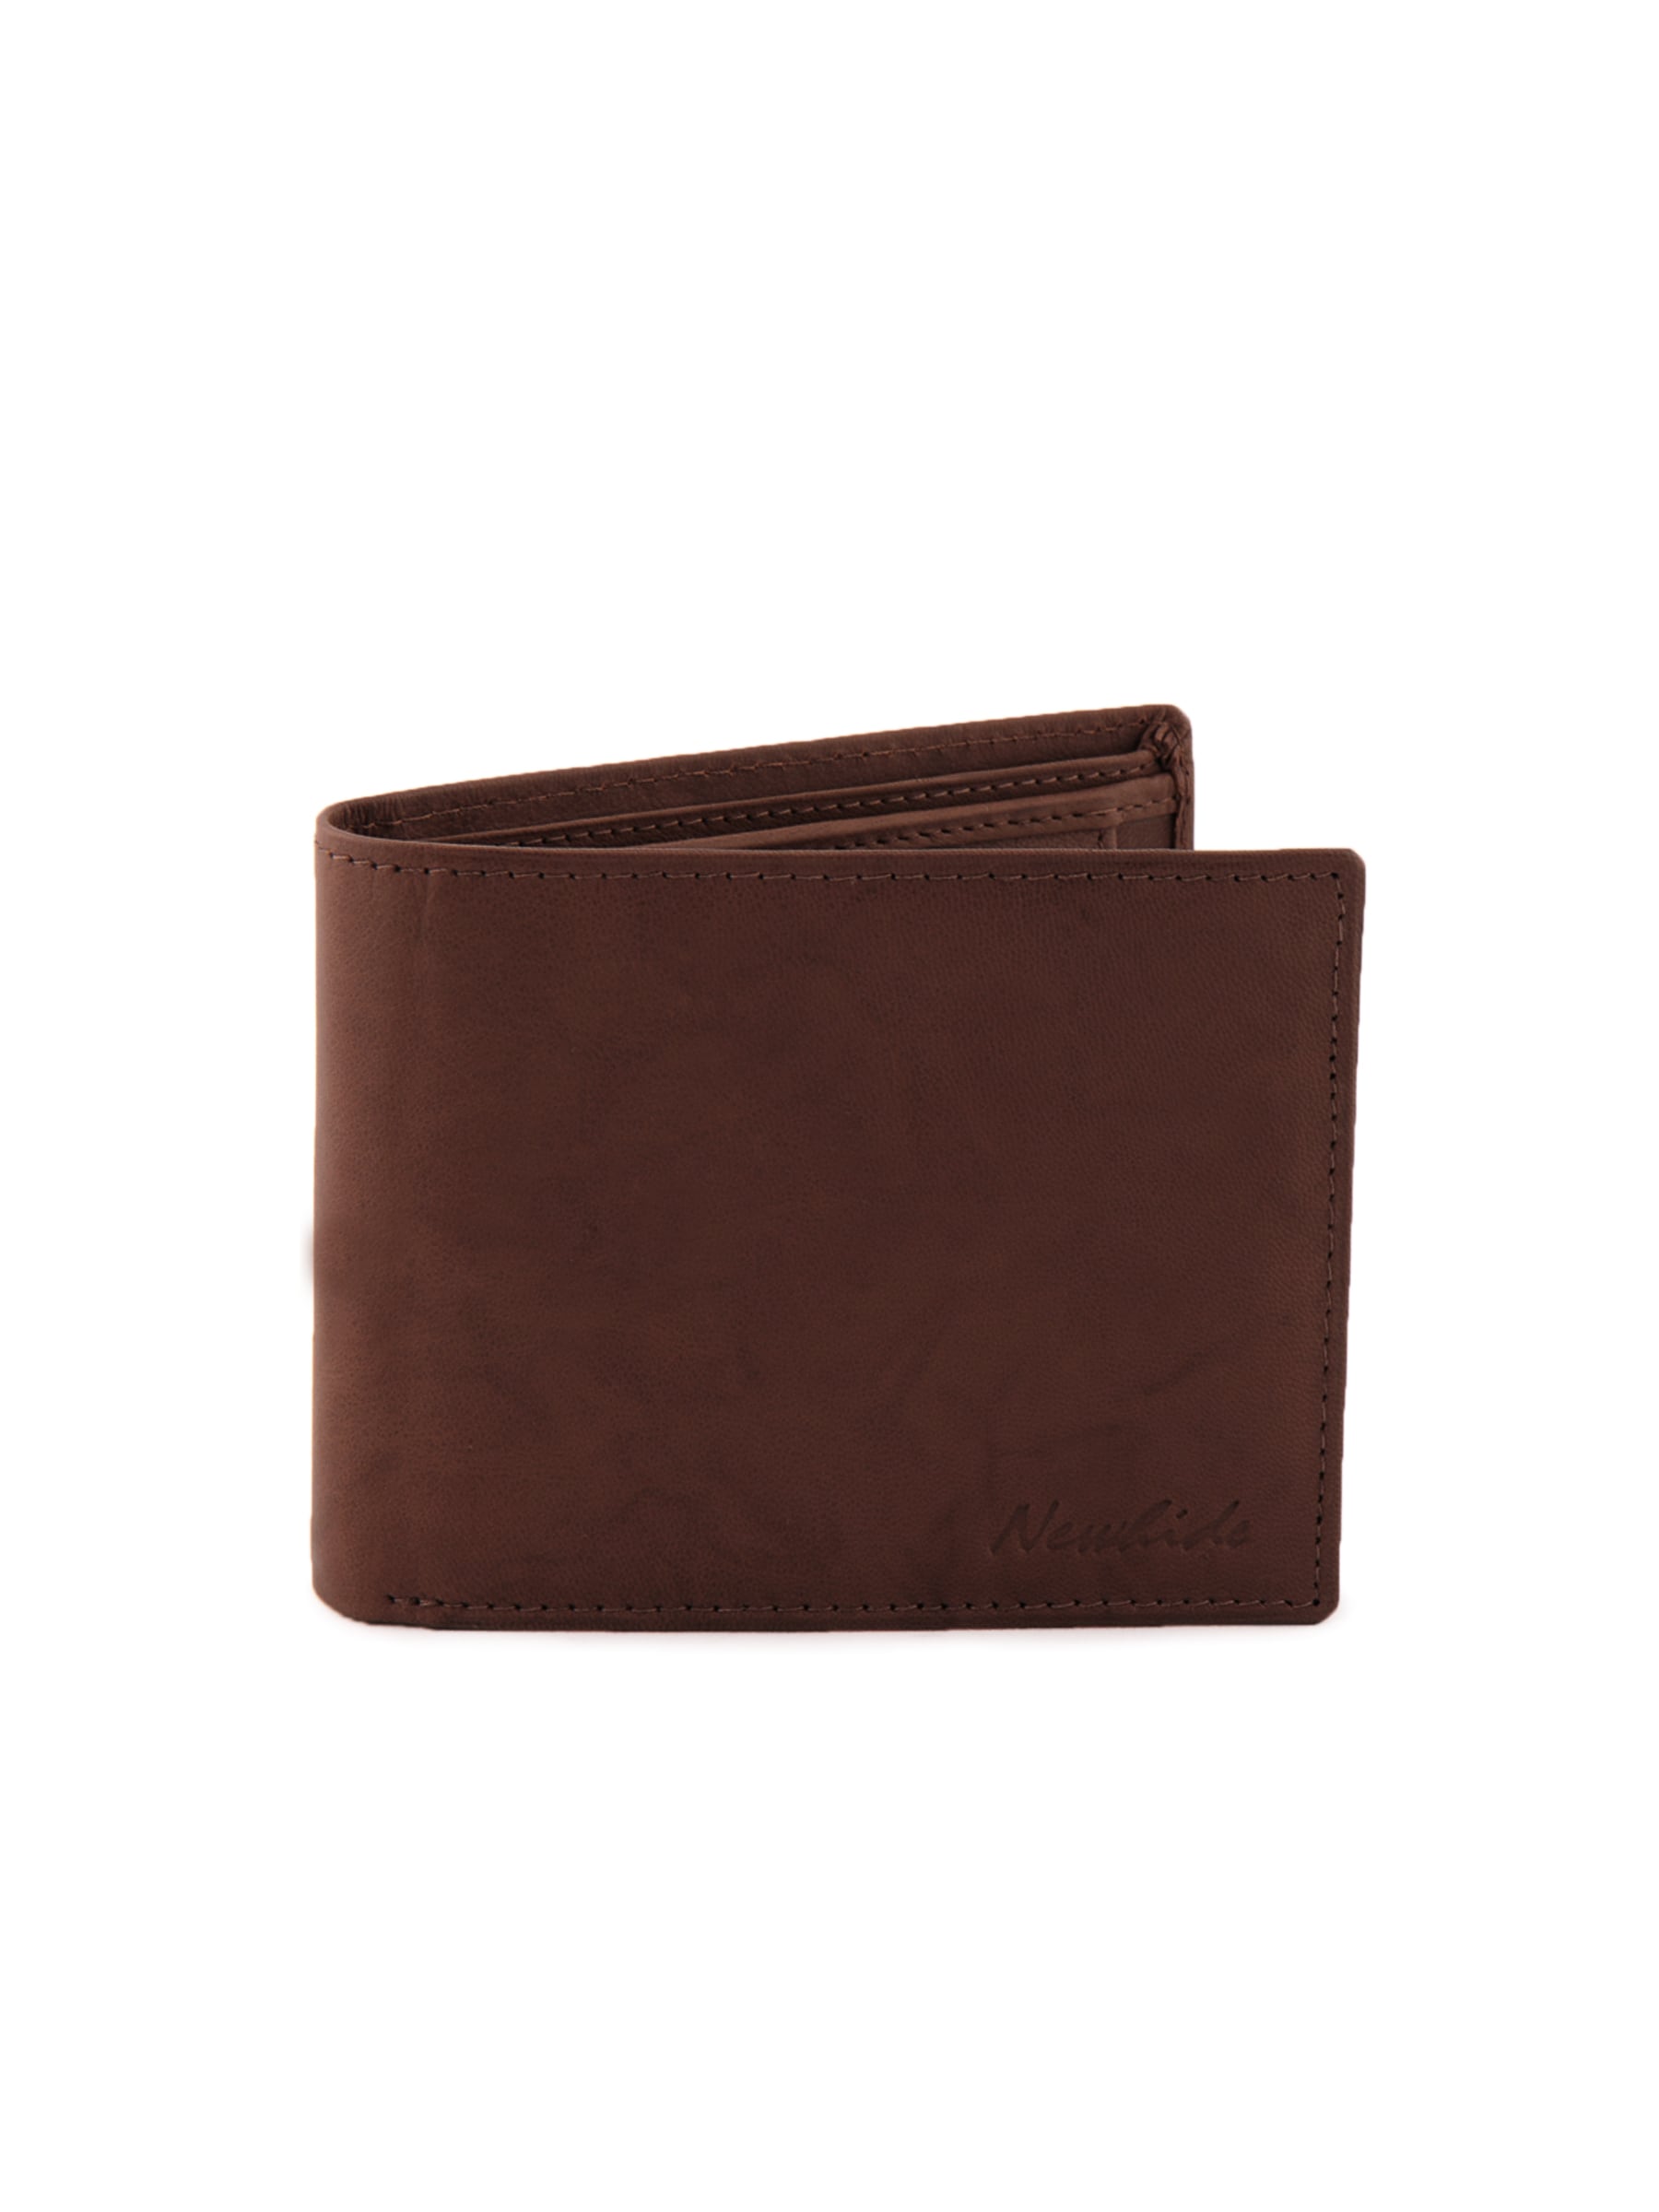 Newhide Smooth Finish Wallet